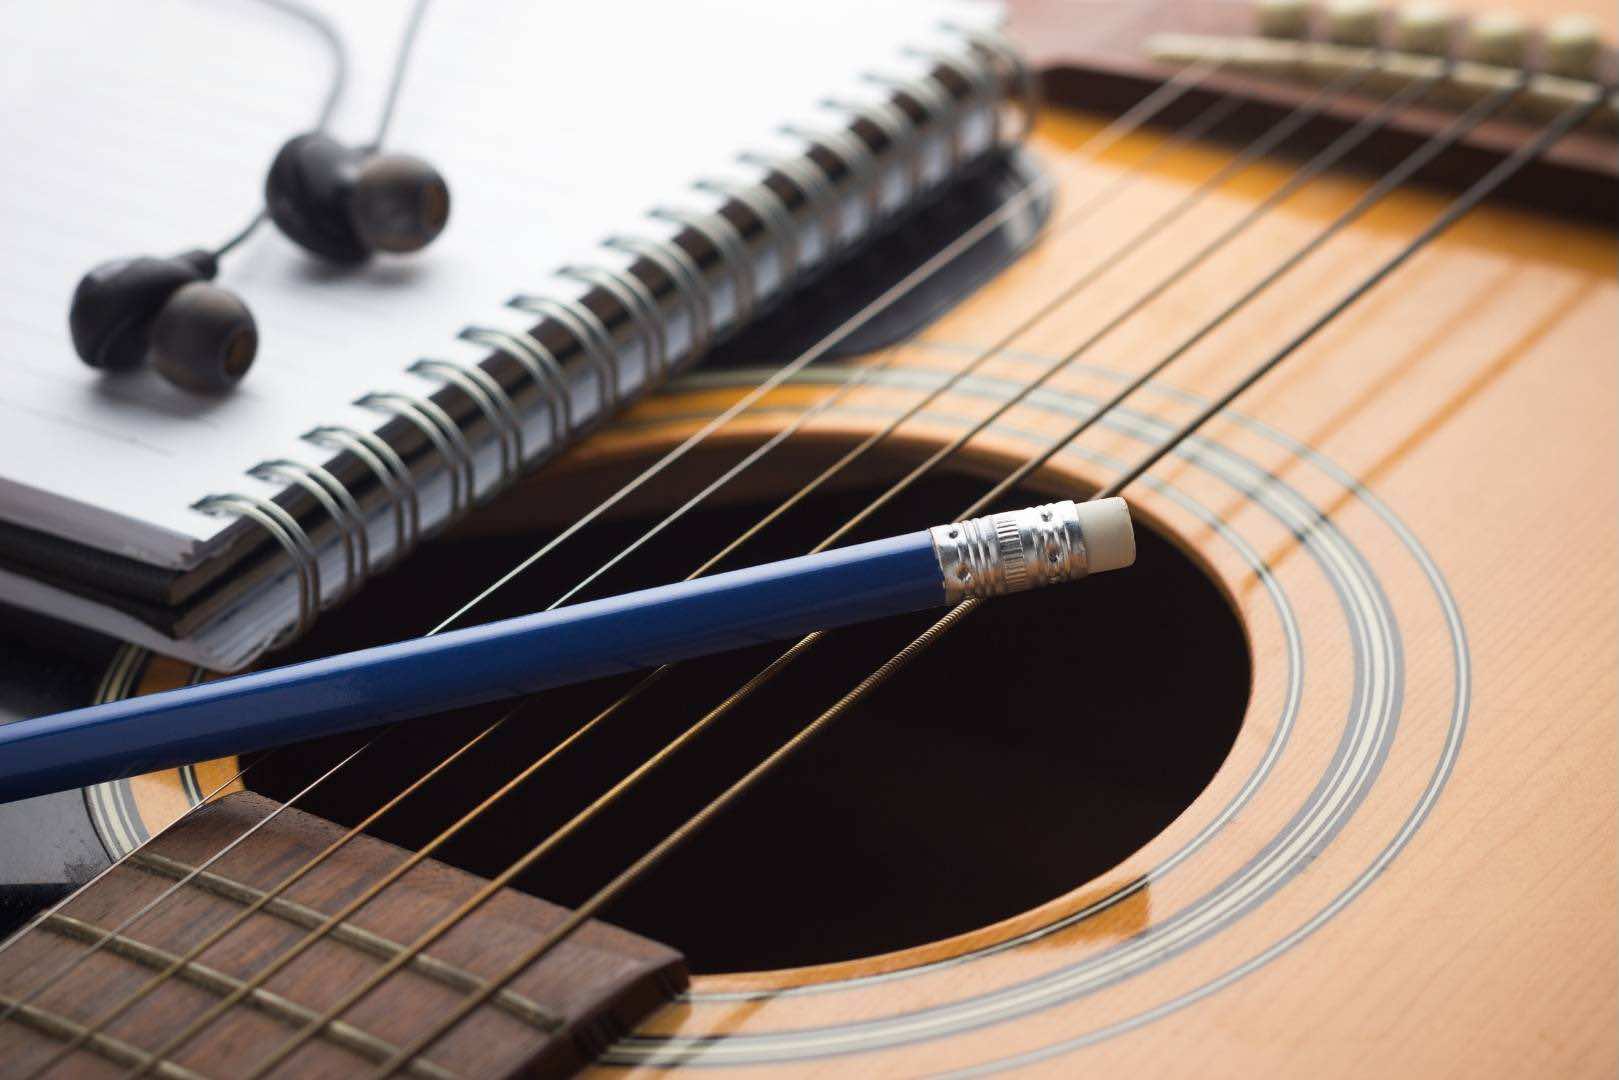 How To Write Your Own Song On Acoustic Guitar